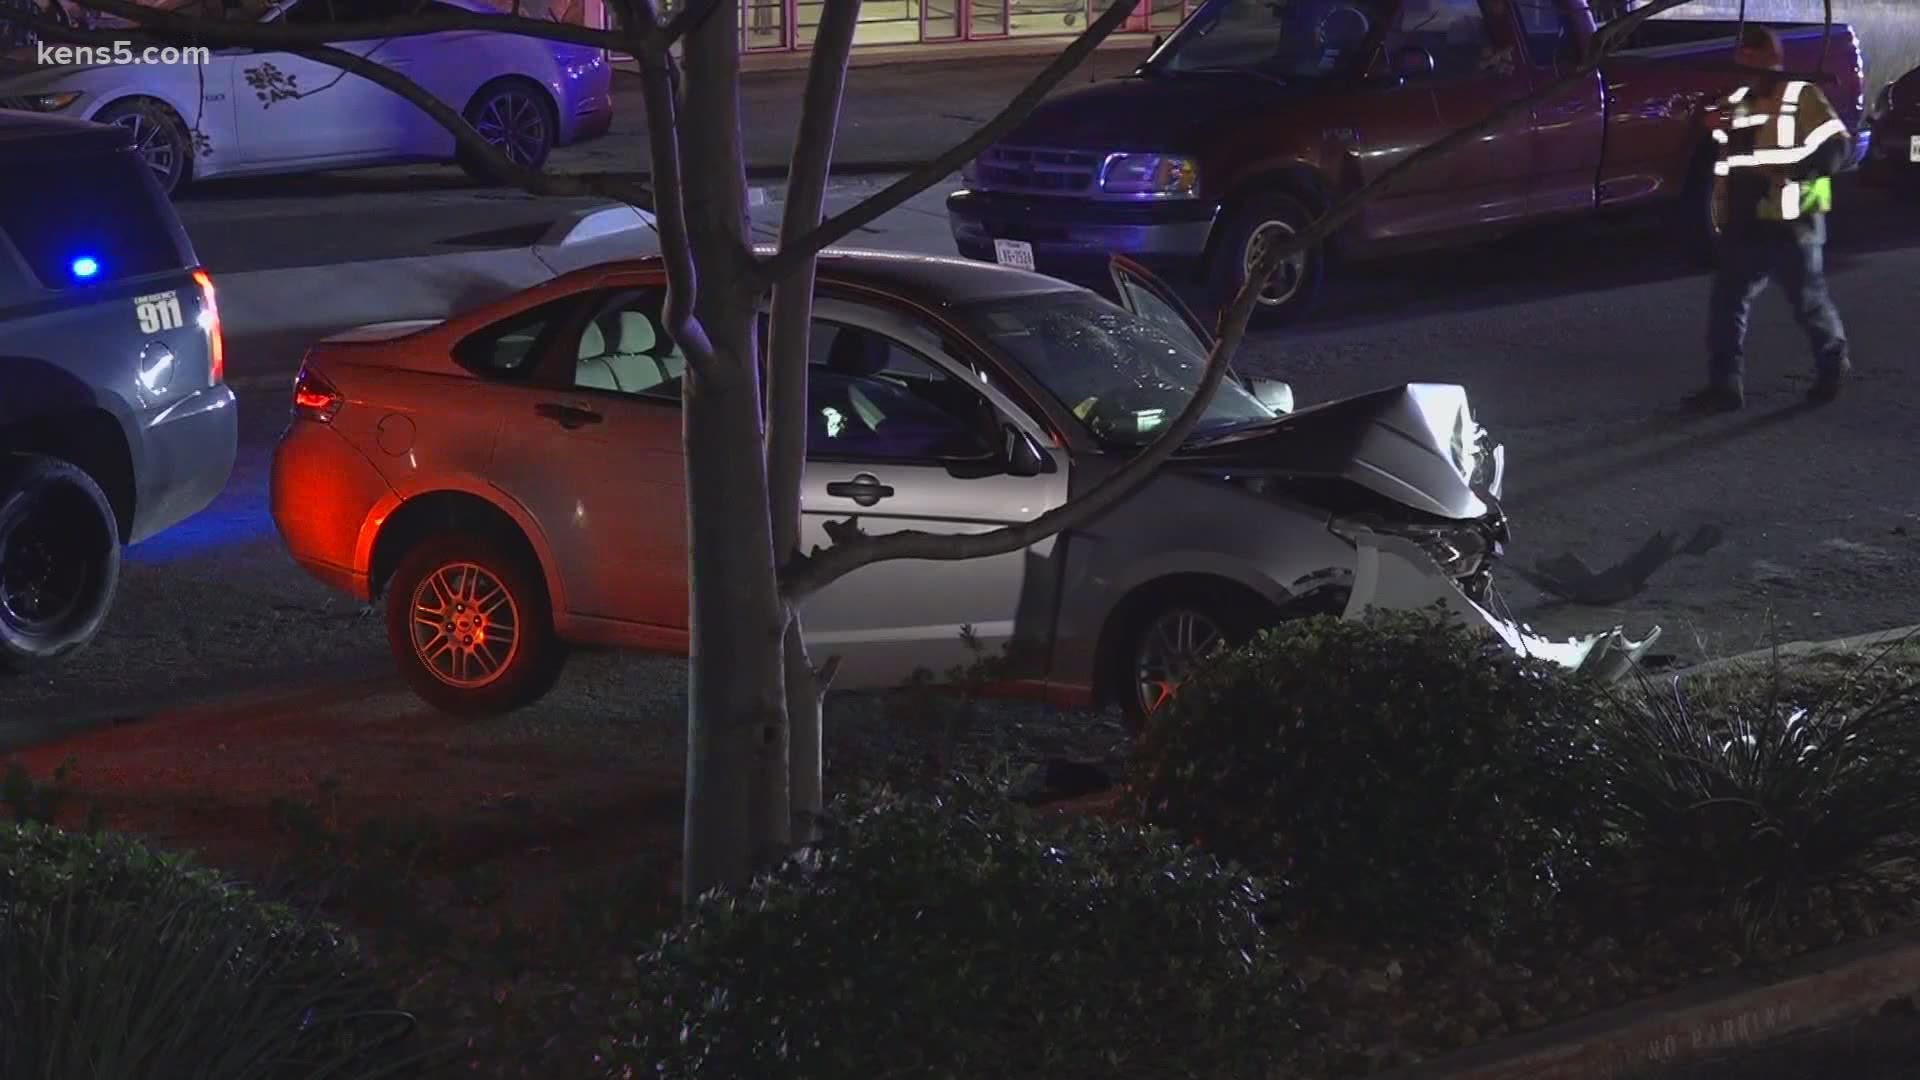 A police chase in Castle Hills ended in a crash, and the suspect reportedly tried to run from the scene, officers said.